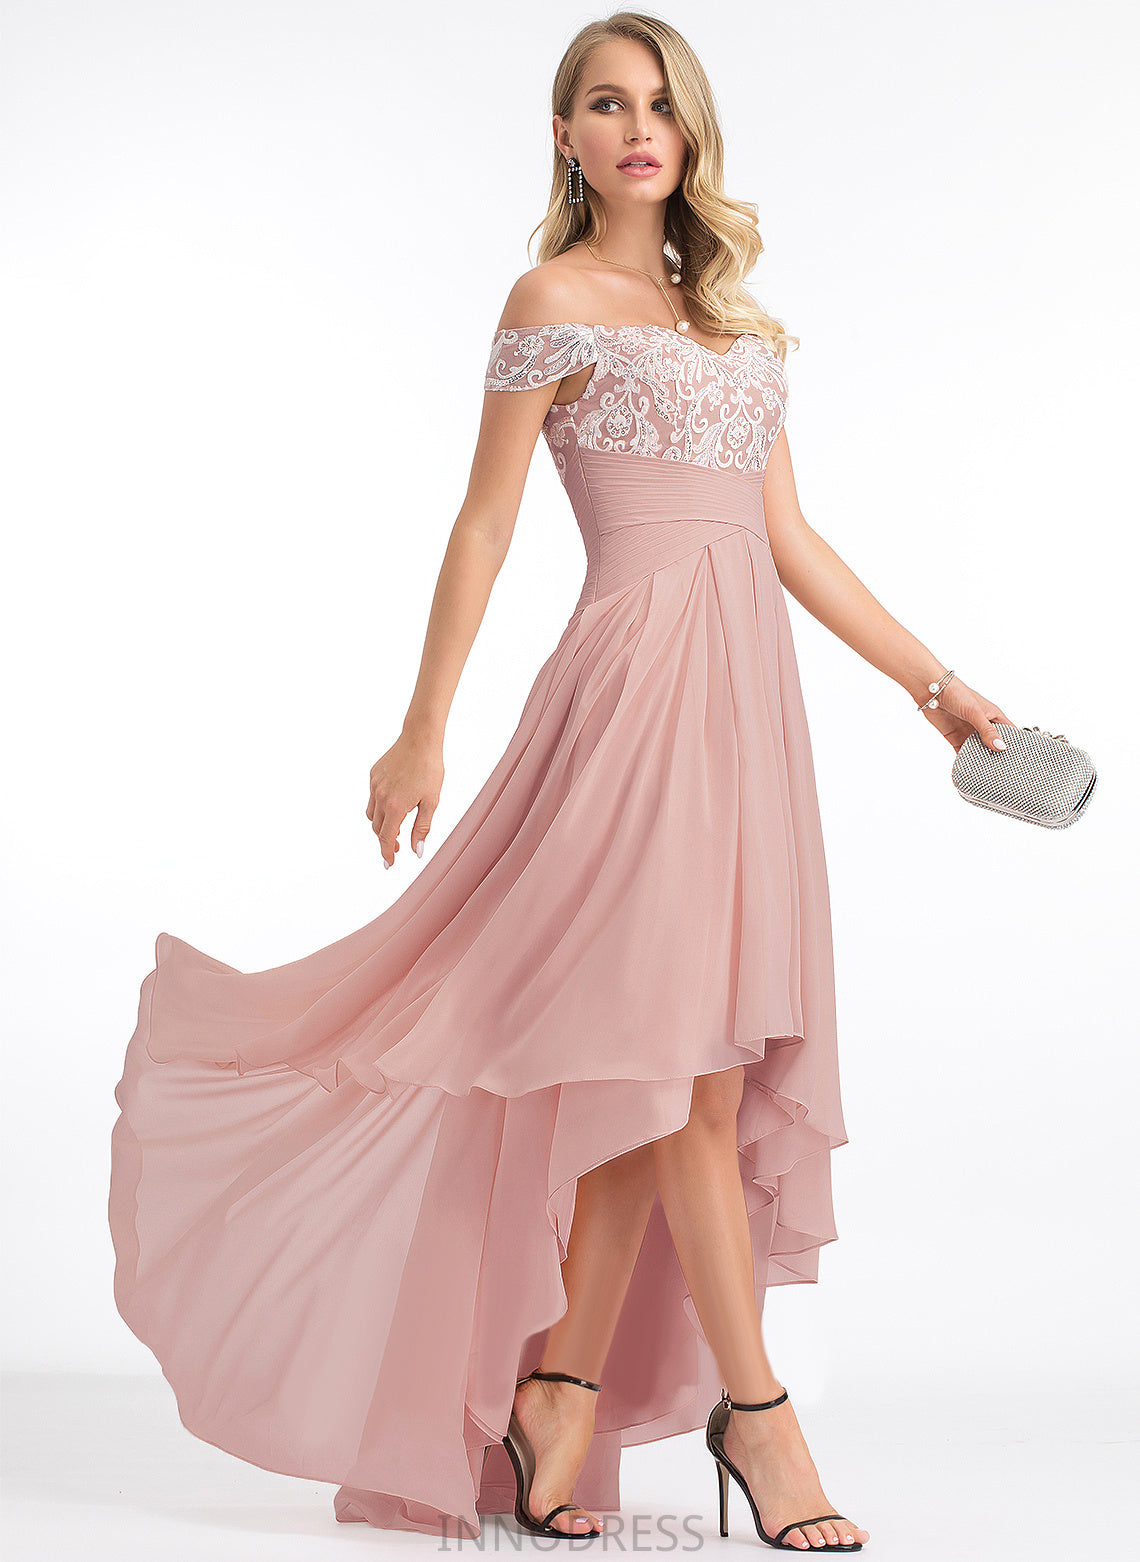 Pleated Rosemary Wedding Dresses A-Line Asymmetrical Lace Off-the-Shoulder Wedding Chiffon Dress With